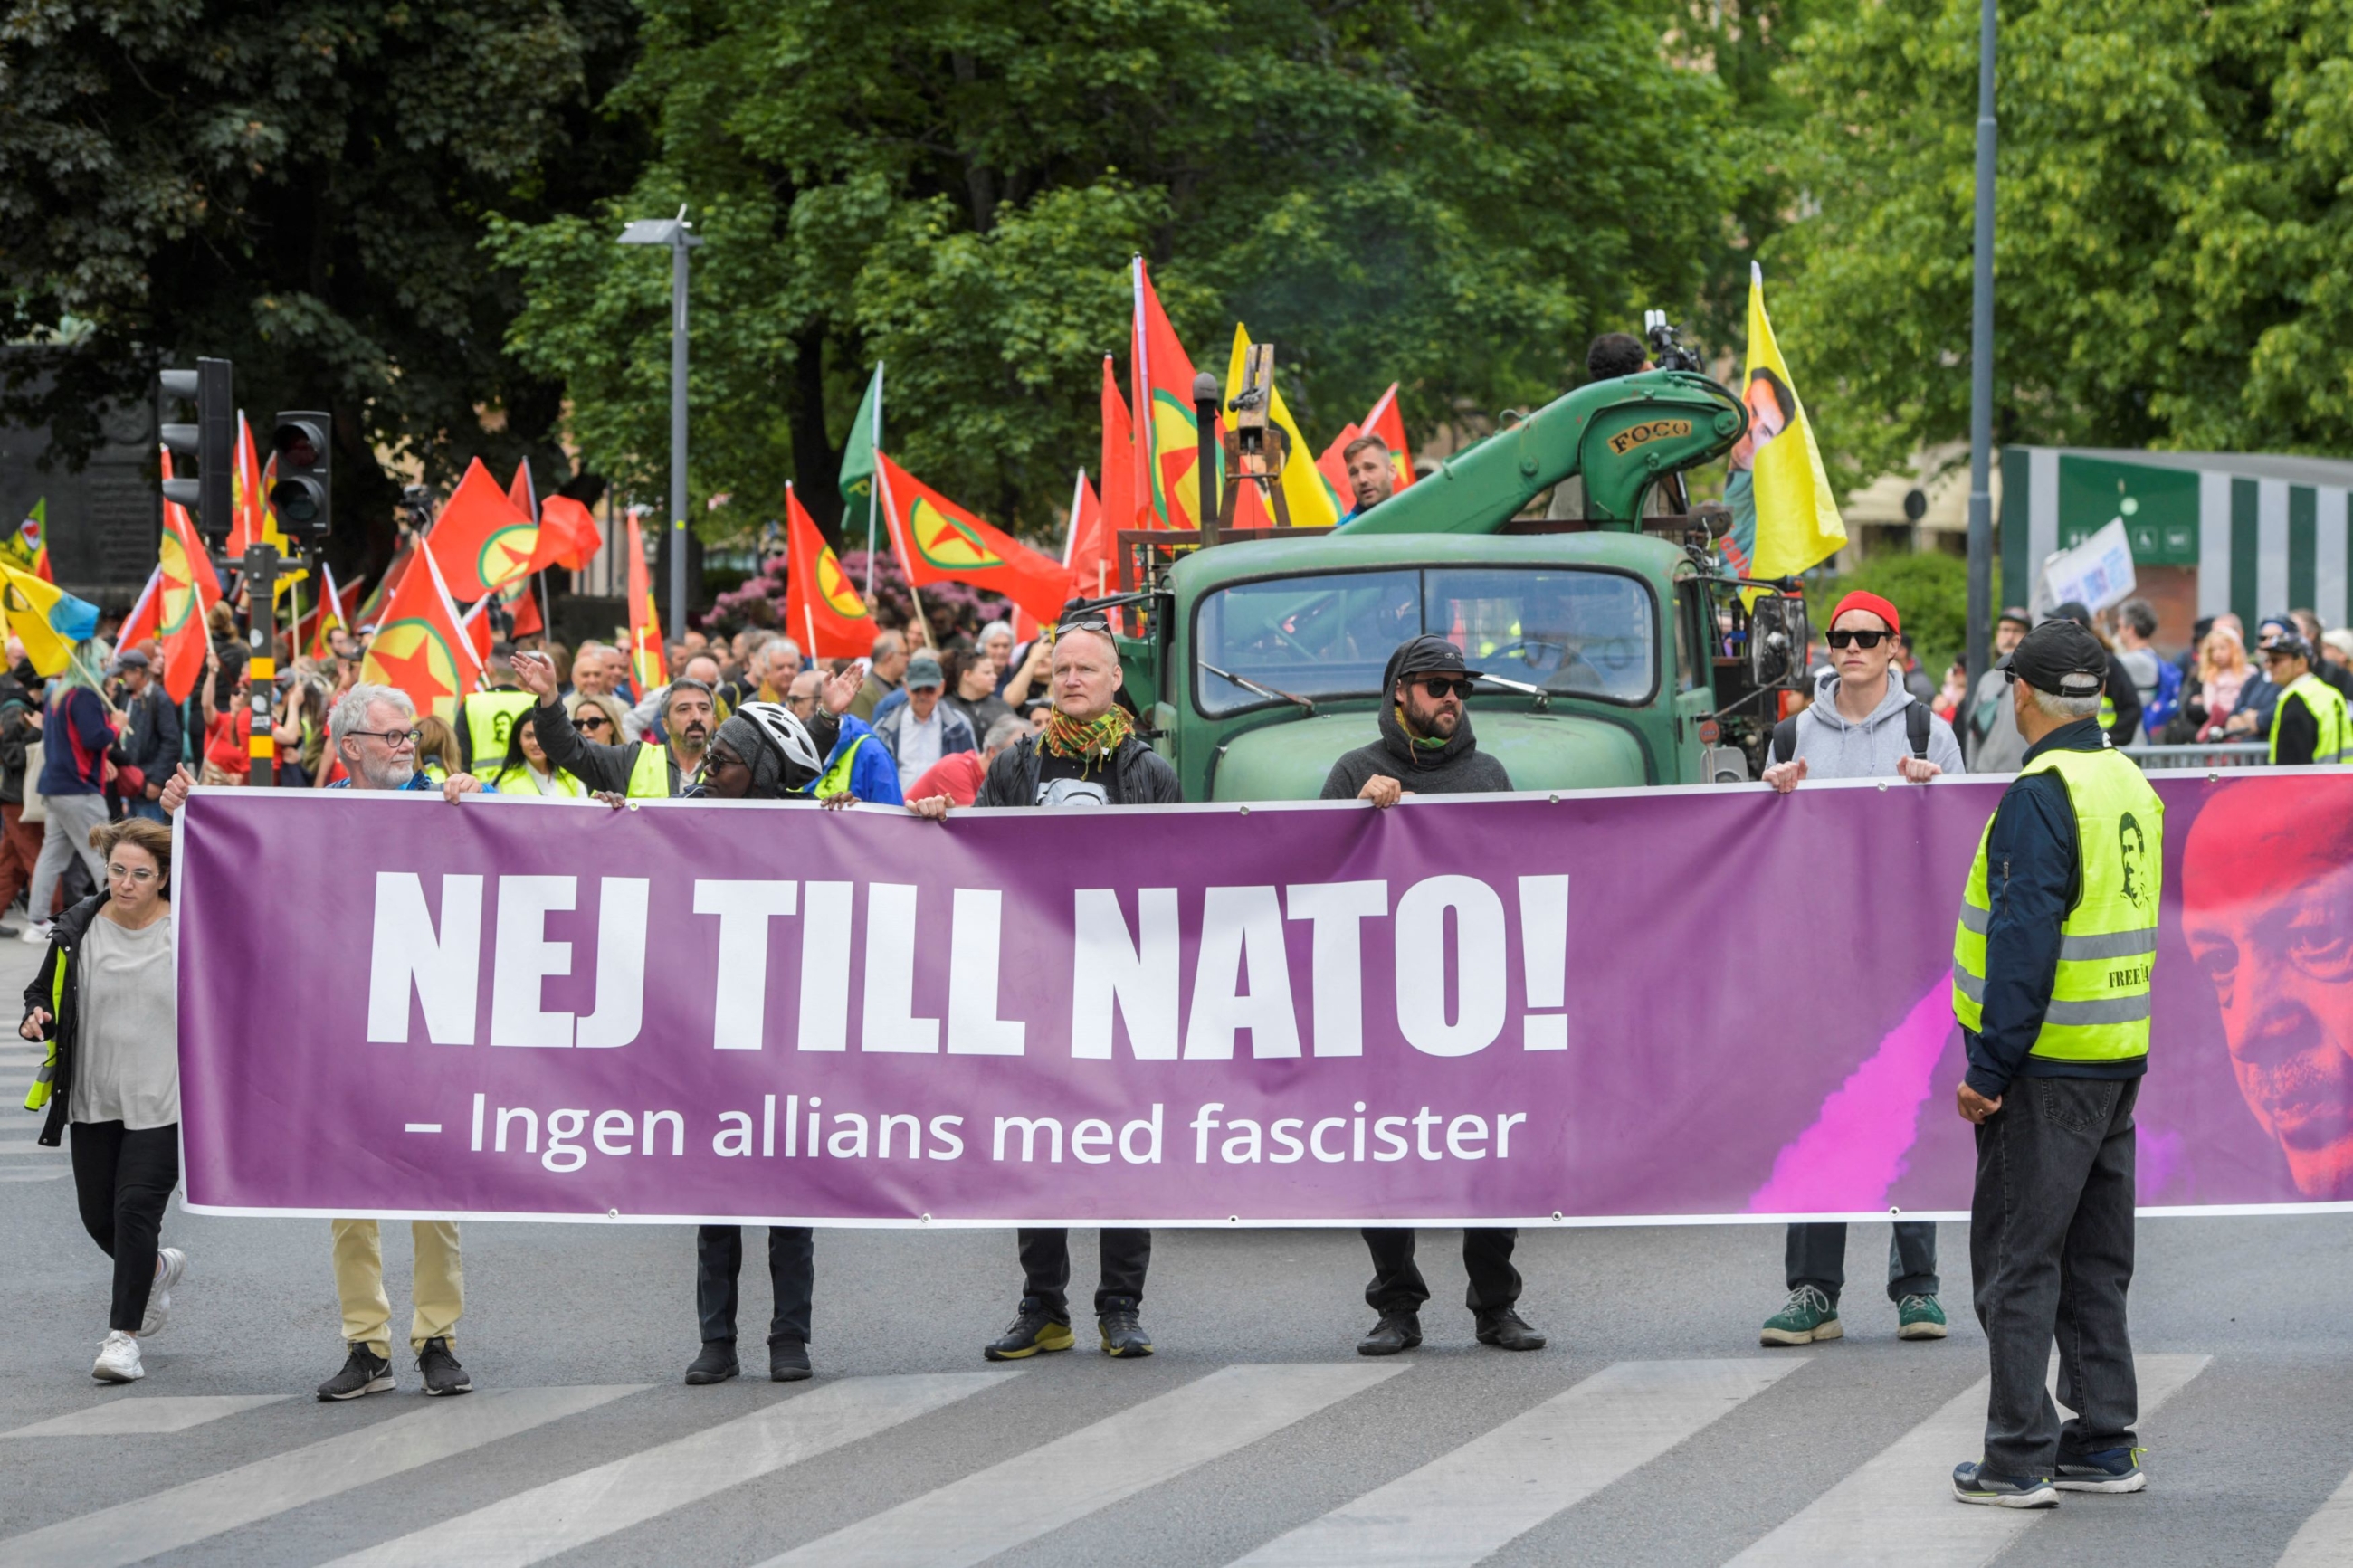 Activists of the "Alliance against NATO" network hold a banner reading "No to NATO! - No alliance with fascists" during a demonstration in Stockholm on 3 June (AFP)